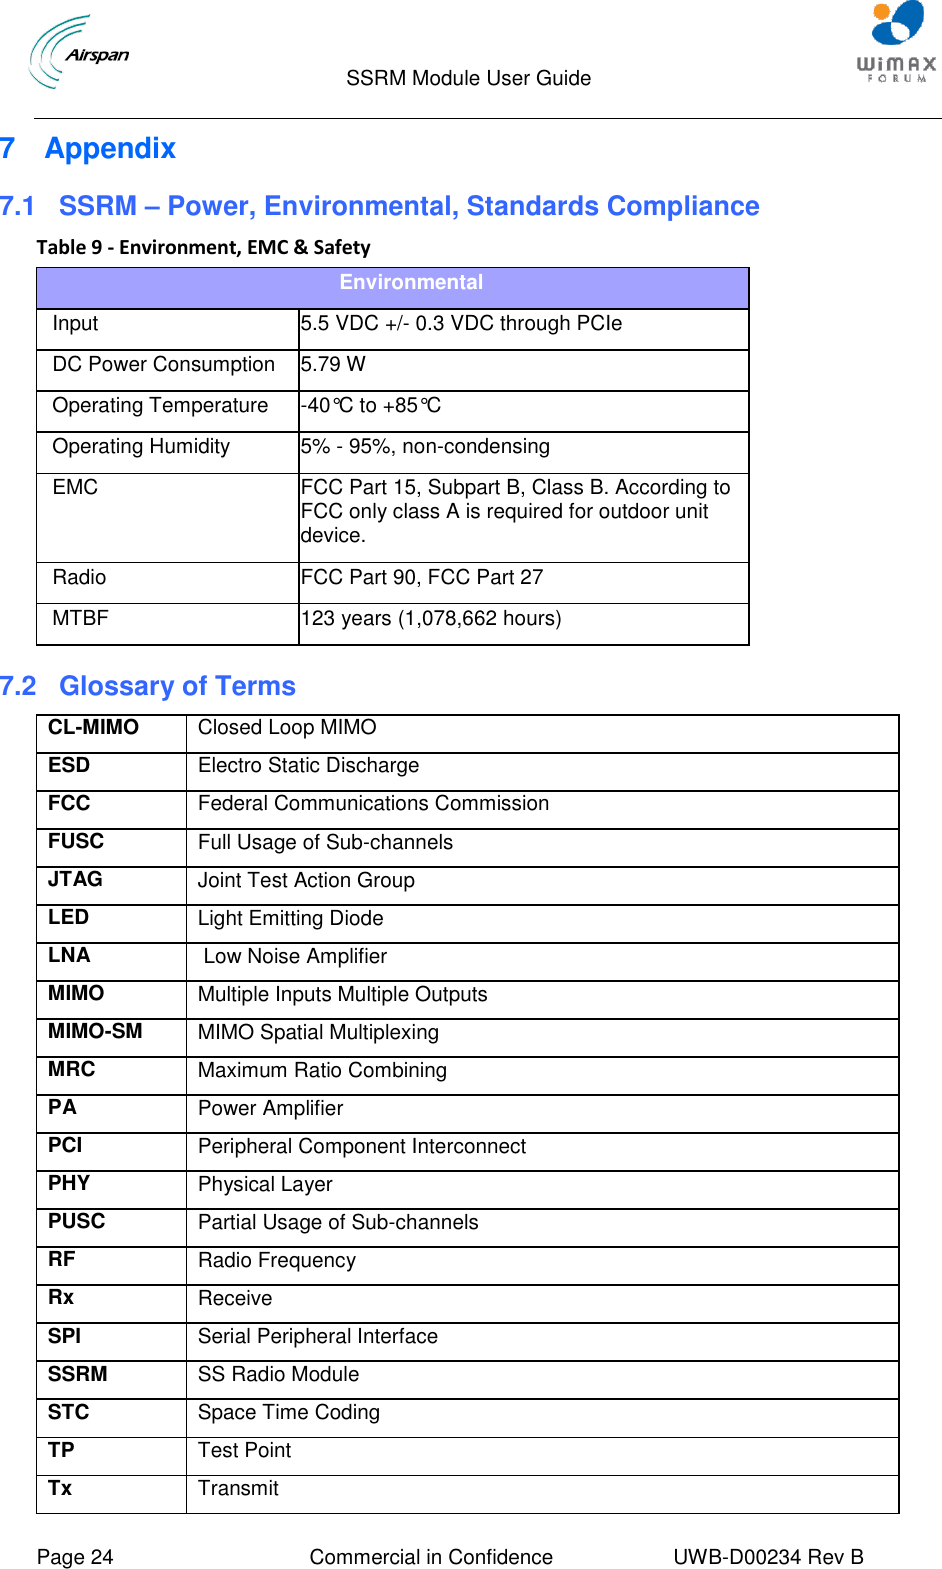                                  SSRM Module User Guide     Page 24  Commercial in Confidence  UWB-D00234 Rev B    7  Appendix 7.1 SSRM – Power, Environmental, Standards Compliance Table 9 - Environment, EMC &amp; Safety Environmental Input  5.5 VDC +/- 0.3 VDC through PCIe  DC Power Consumption 5.79 W Operating Temperature -40°C to +85°C Operating Humidity 5% - 95%, non-condensing EMC FCC Part 15, Subpart B, Class B. According to FCC only class A is required for outdoor unit device. Radio FCC Part 90, FCC Part 27   MTBF 123 years (1,078,662 hours) 7.2  Glossary of Terms CL-MIMO    Closed Loop MIMO ESD Electro Static Discharge FCC               Federal Communications Commission FUSC Full Usage of Sub-channels JTAG Joint Test Action Group LED Light Emitting Diode LNA  Low Noise Amplifier MIMO Multiple Inputs Multiple Outputs MIMO-SM    MIMO Spatial Multiplexing MRC Maximum Ratio Combining PA Power Amplifier PCI Peripheral Component Interconnect PHY Physical Layer PUSC Partial Usage of Sub-channels RF Radio Frequency Rx Receive SPI Serial Peripheral Interface SSRM SS Radio Module STC Space Time Coding TP Test Point Tx Transmit 